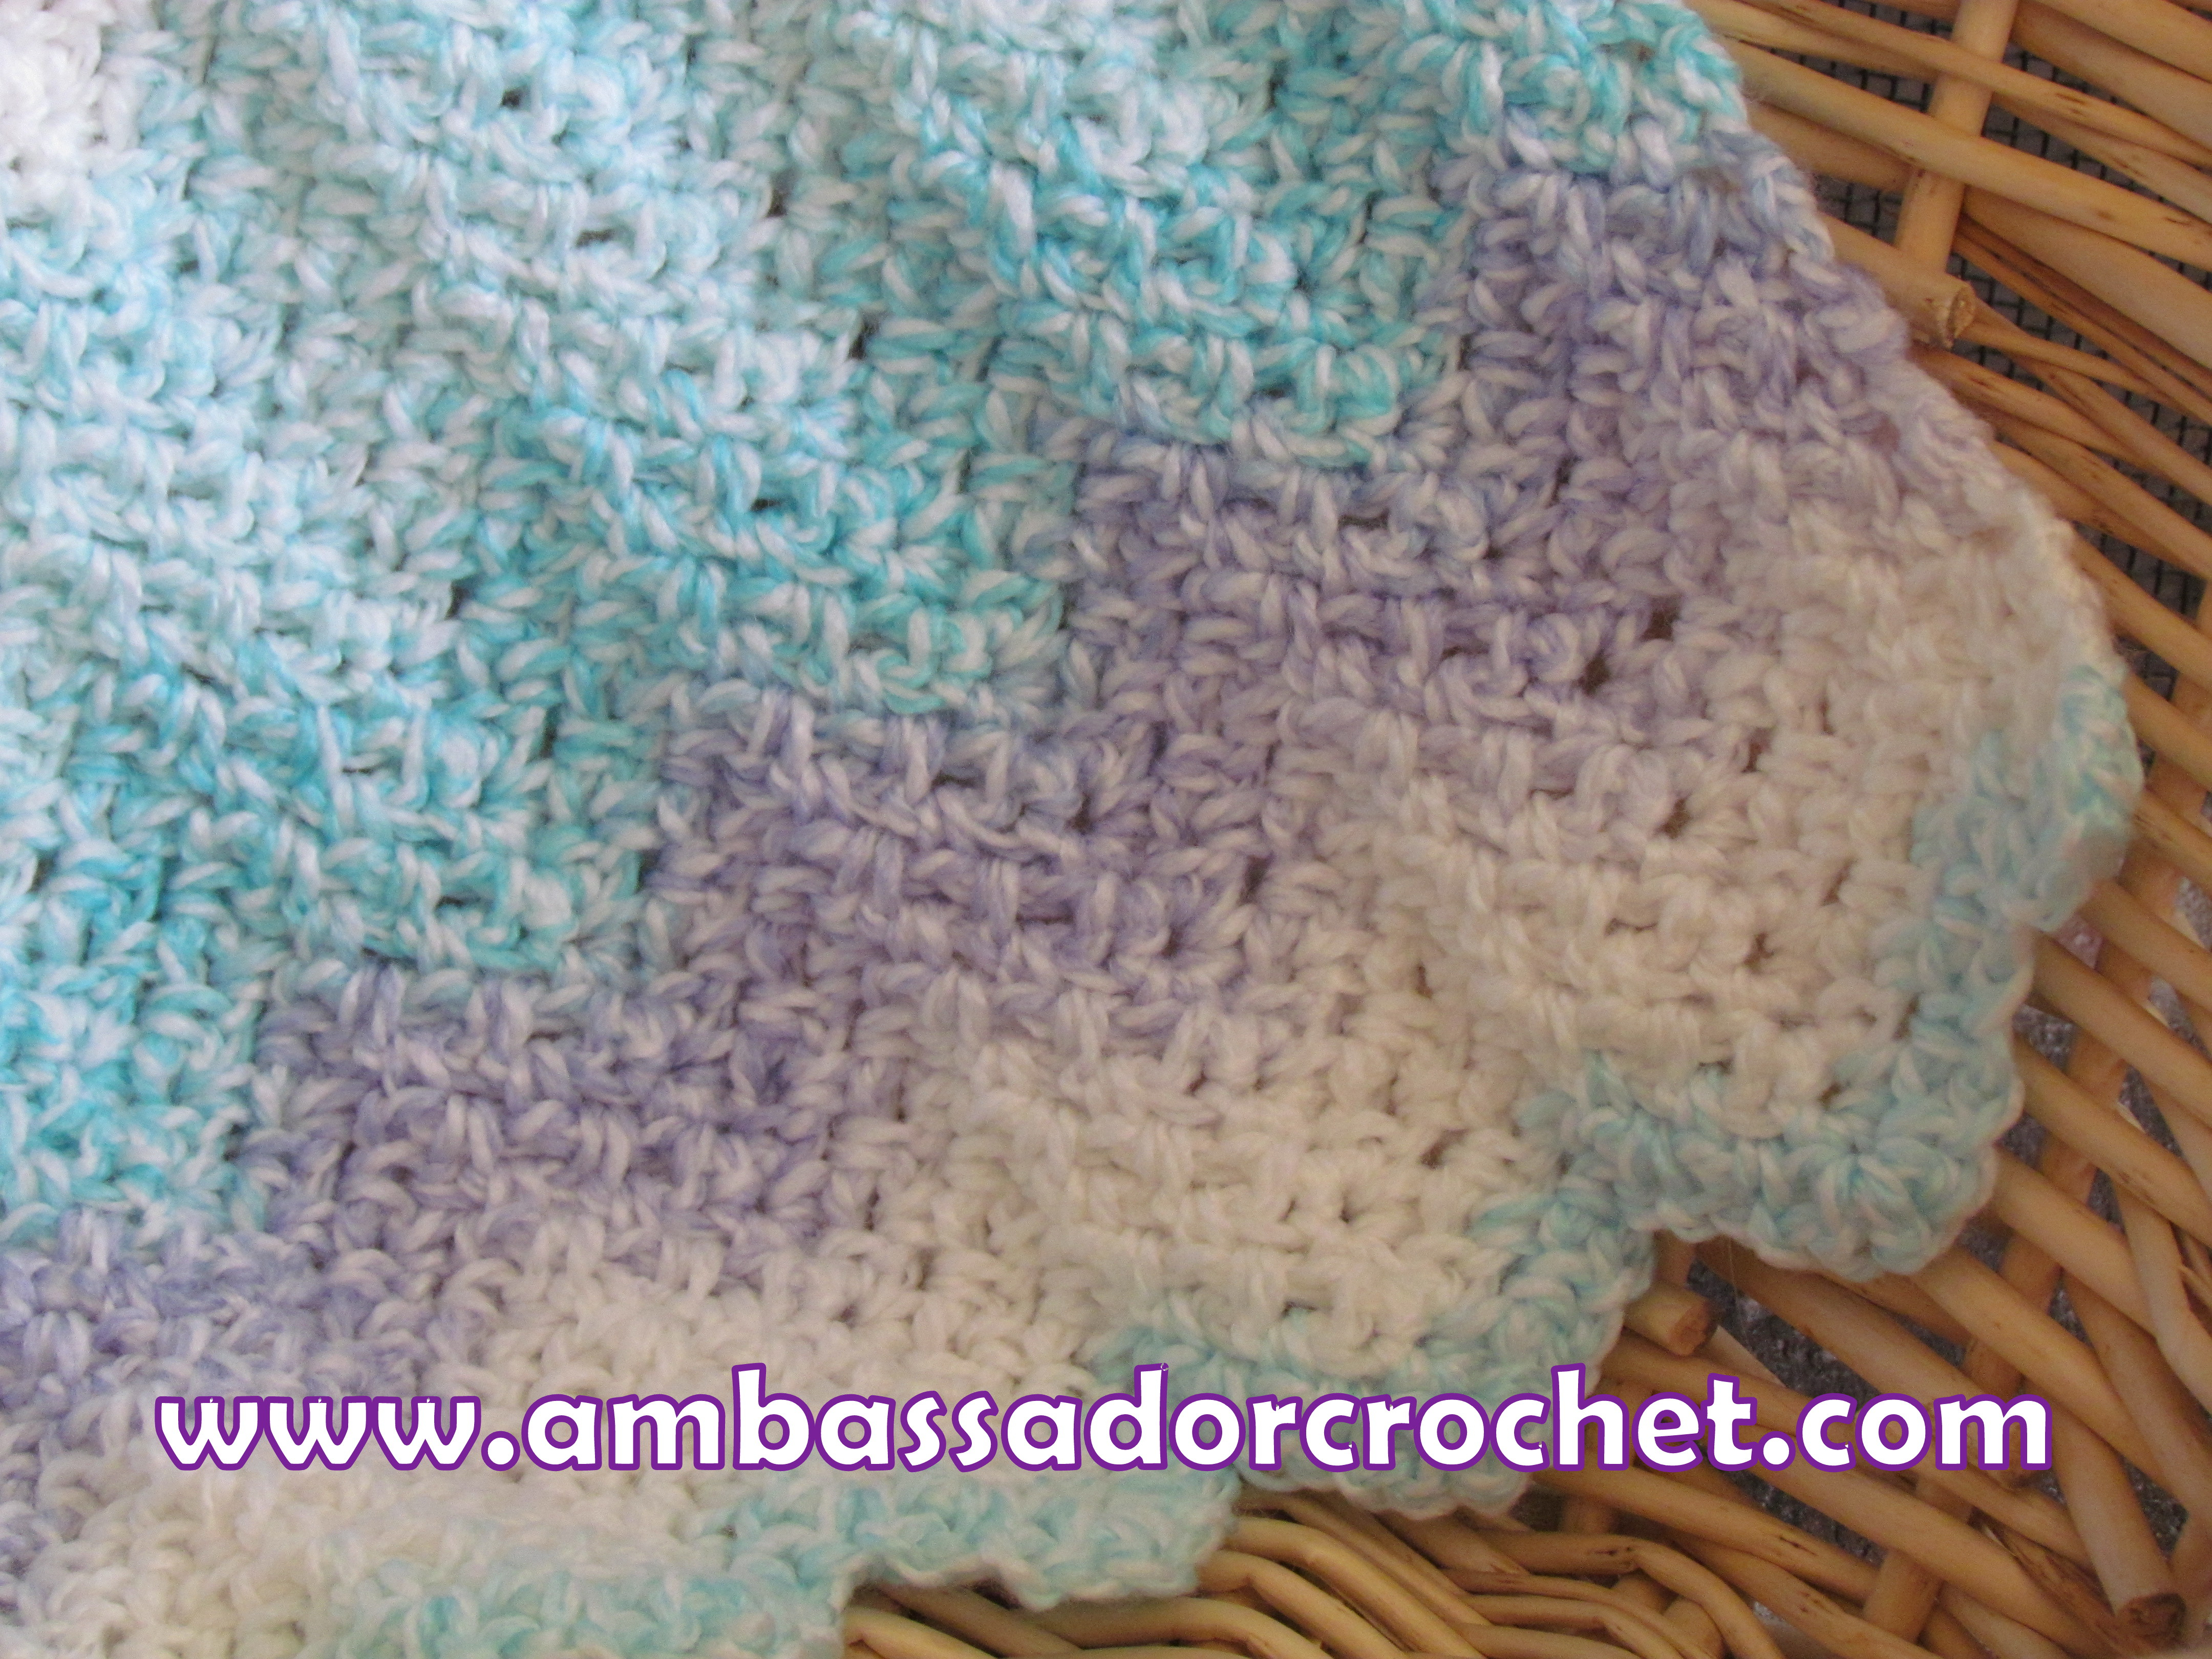 Crochet Patterns Baby Blankets Sleep Well With Free Crochet Patterns For Ba Blankets Crochet